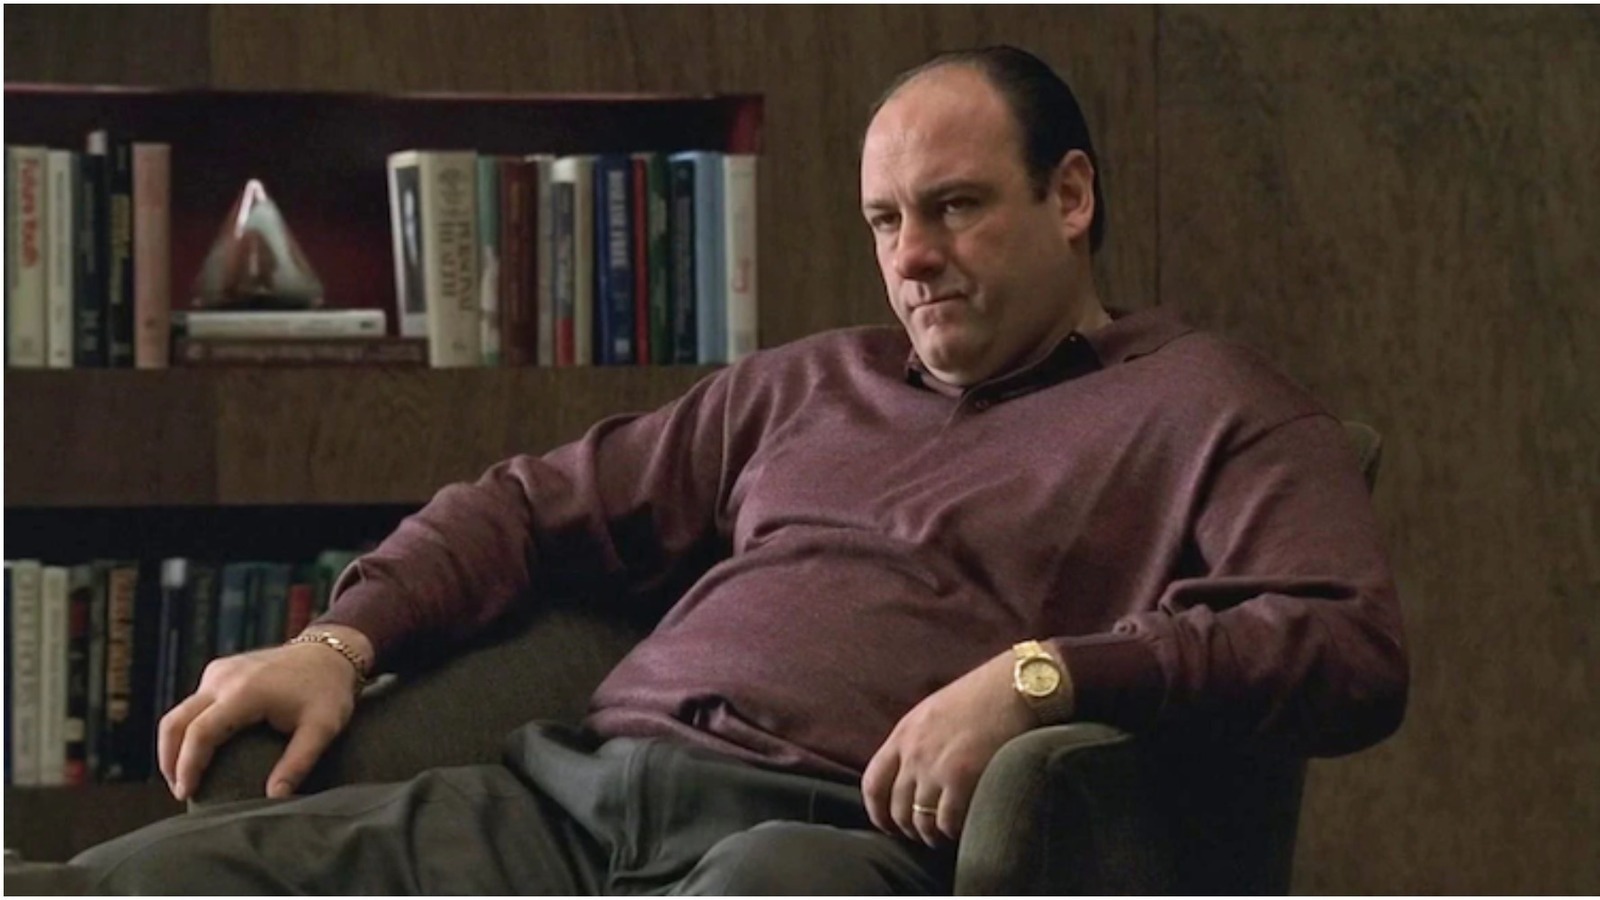 Sopranos Creator Accidentally Reveals What Happened to Tony in Series Finale